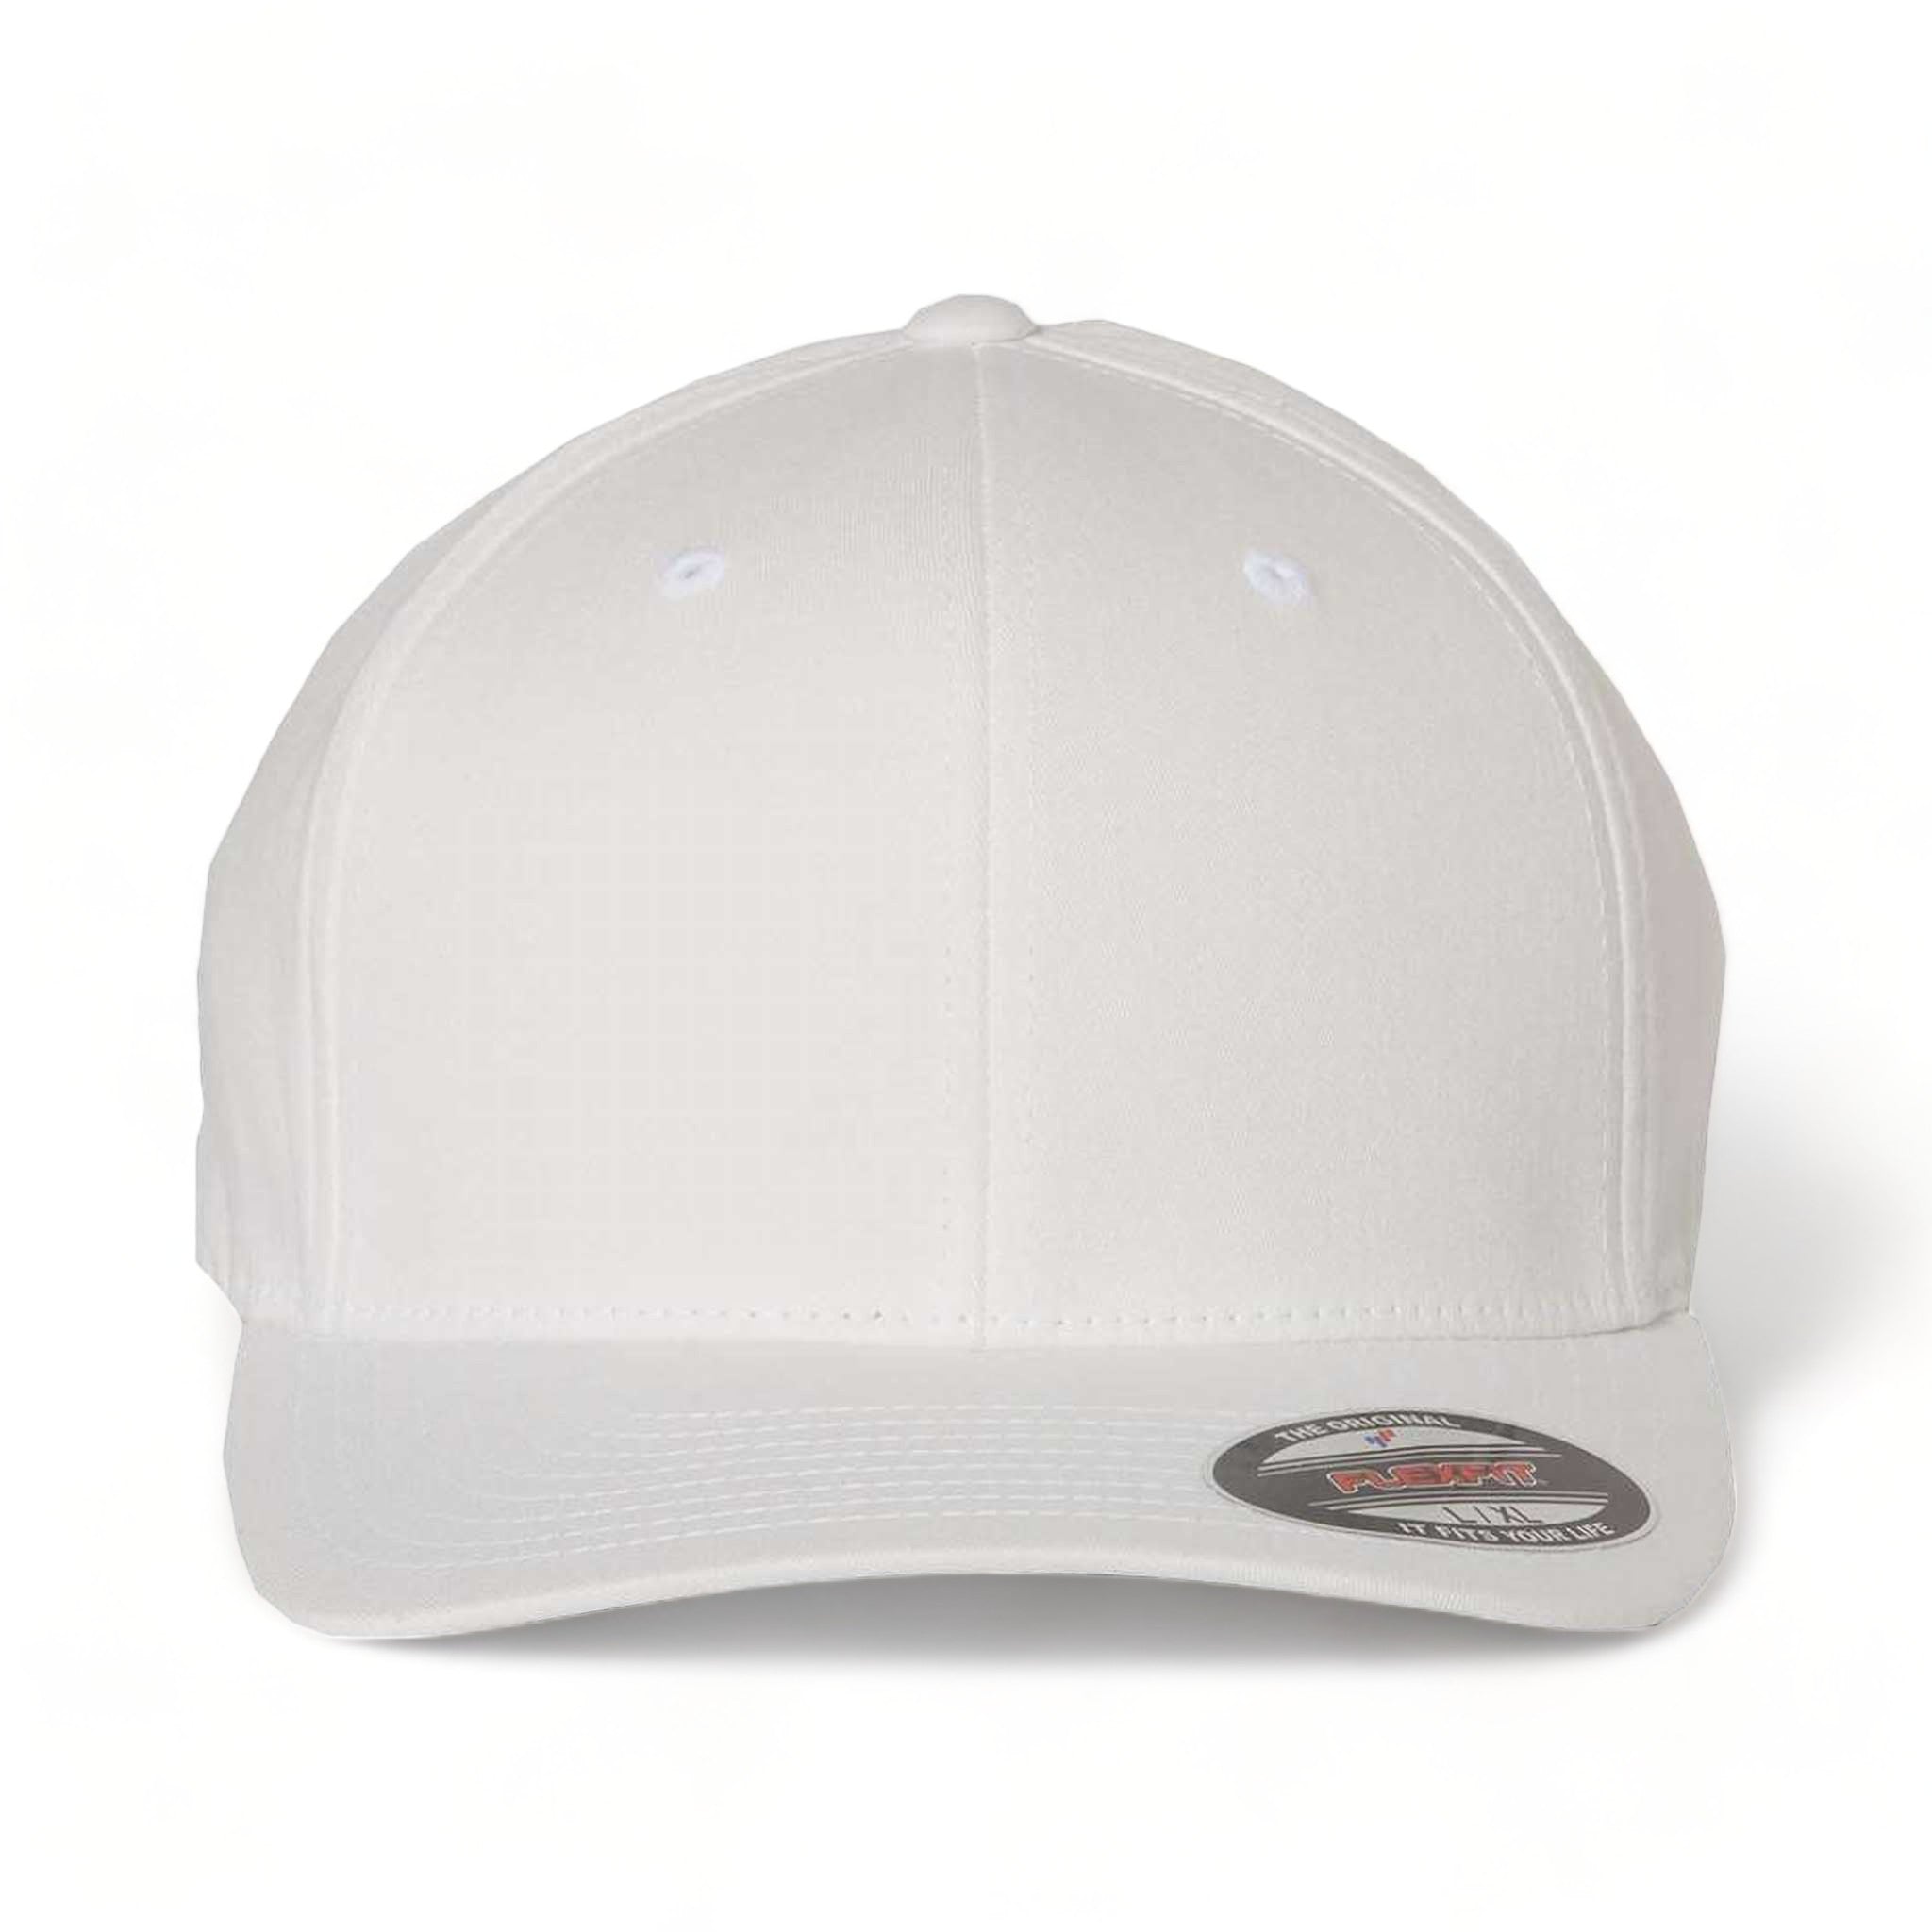 Front view of Flexfit 5001 custom hat in white